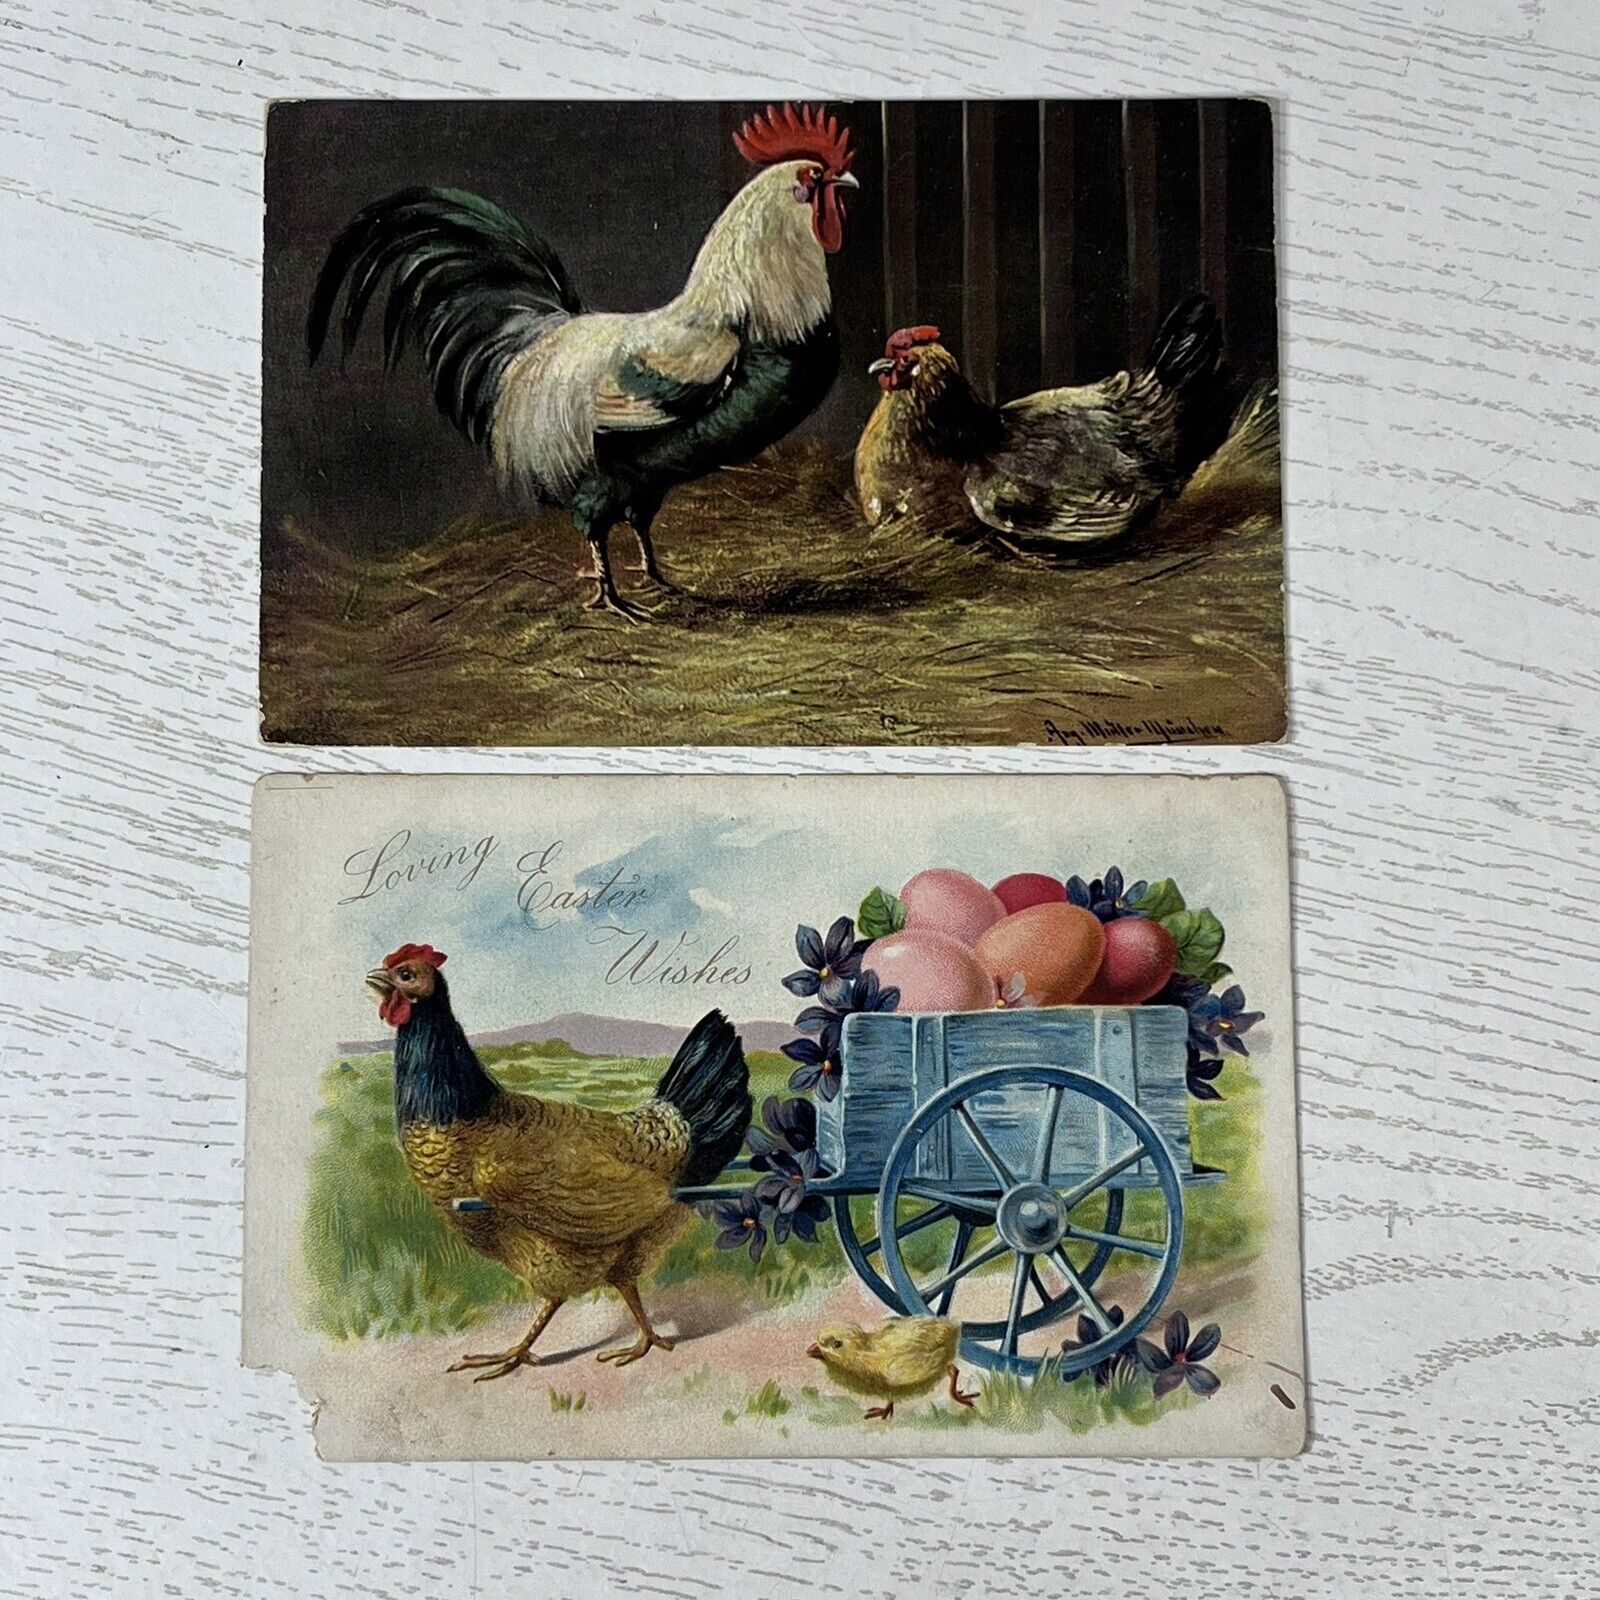 Vintage Easter Farm Postcards Lot of 2 Hens Rooster Egg Cart Early 1900s